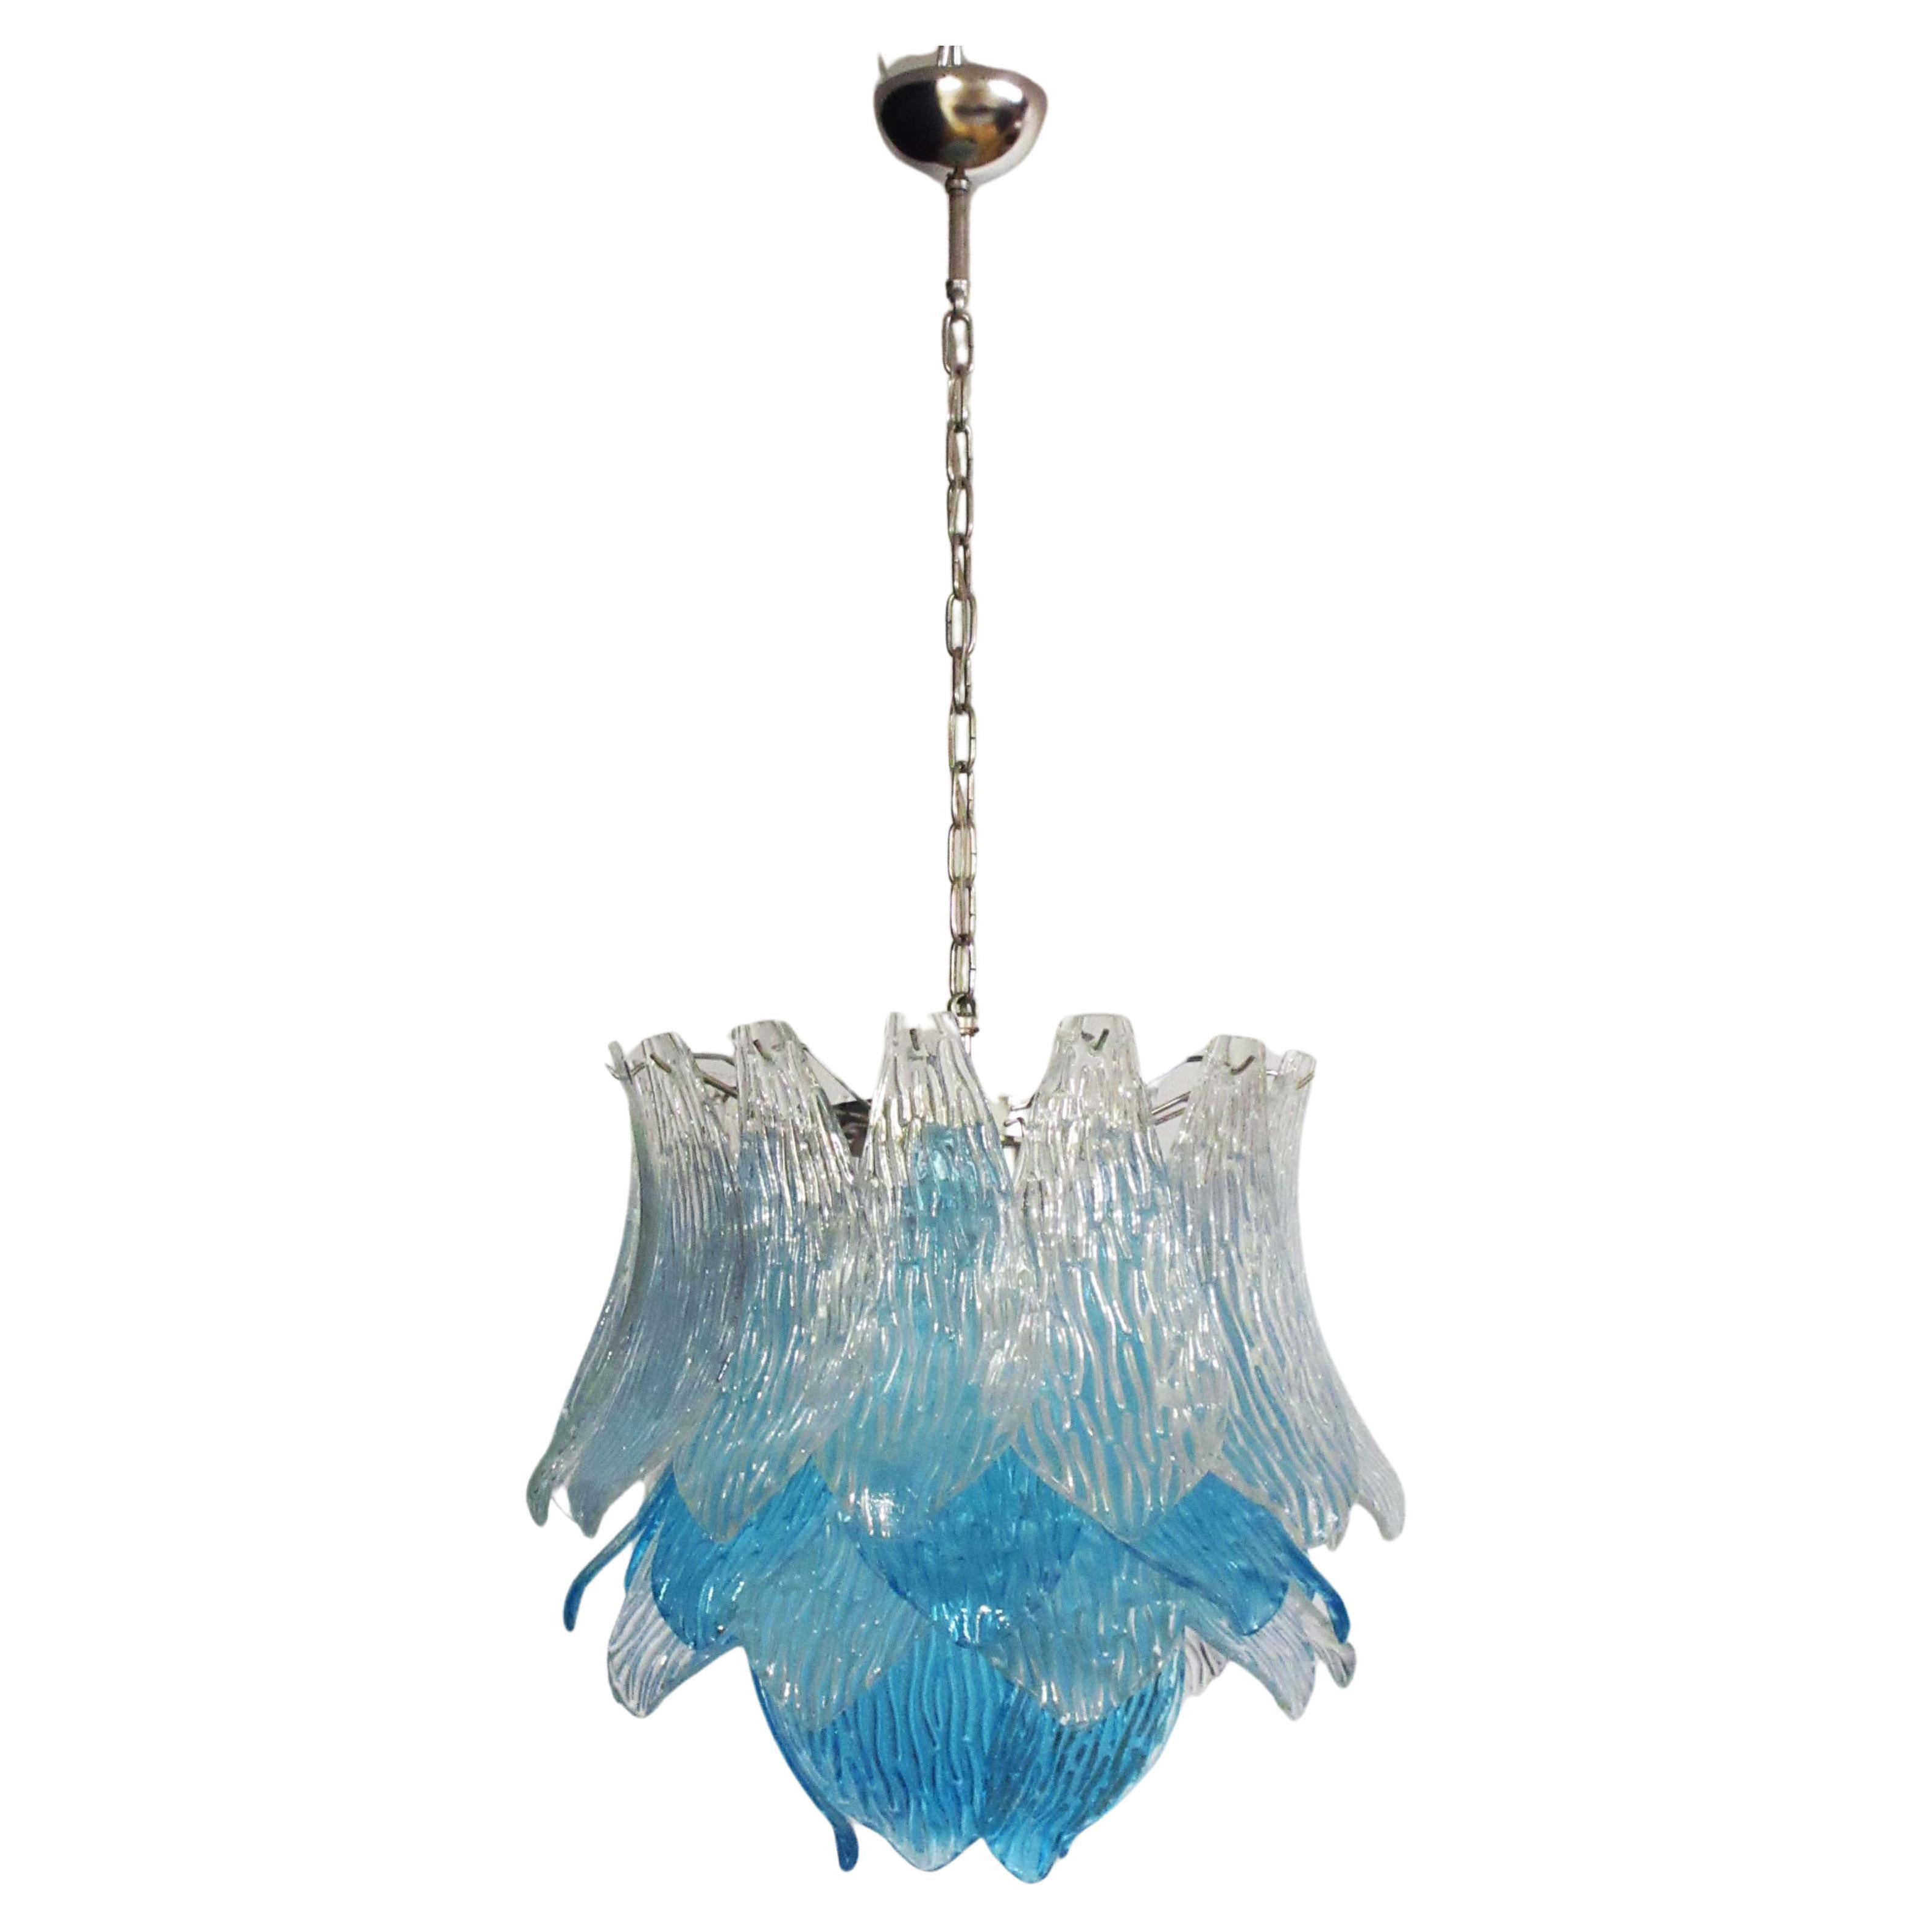 Italian vintage Murano Glass chandelier - 38 glasses - blue and trasparent For Sale